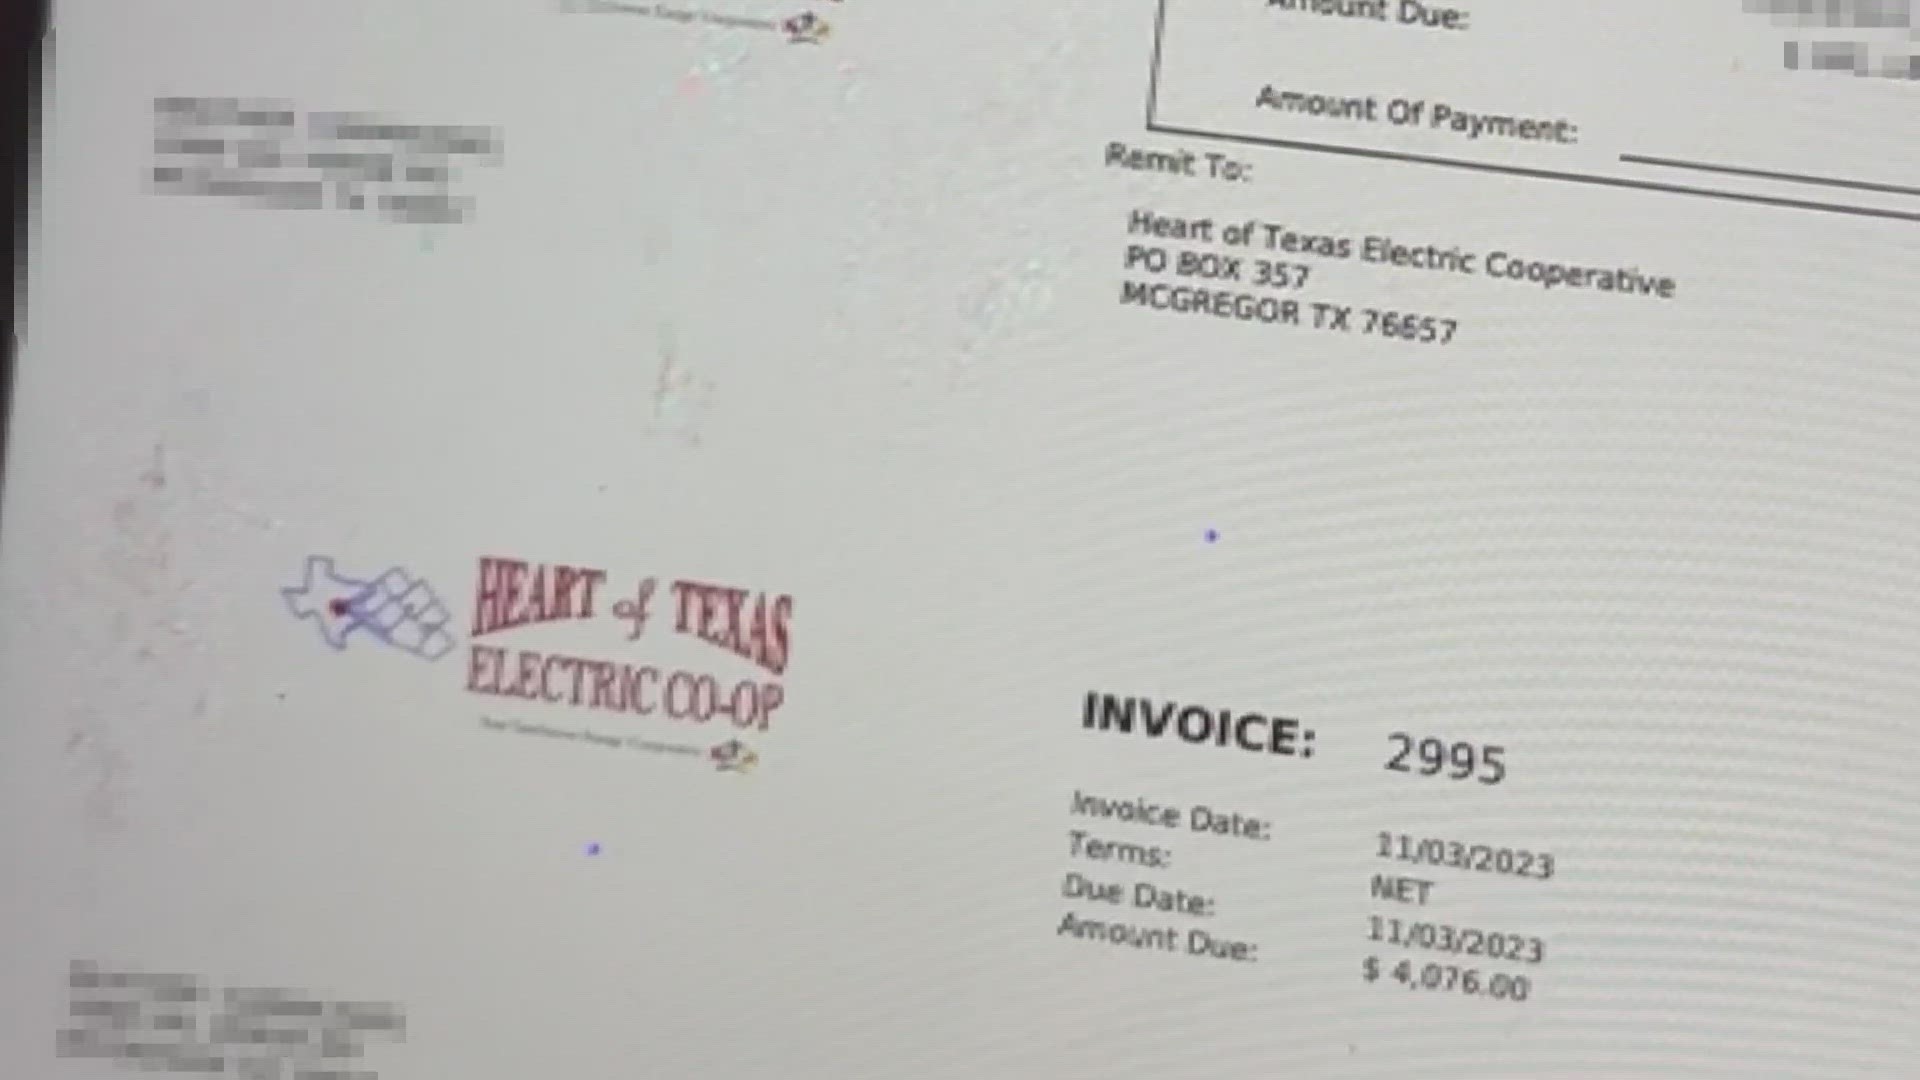 For months a family in Moody, Texas has waited for electricity and is still waiting.